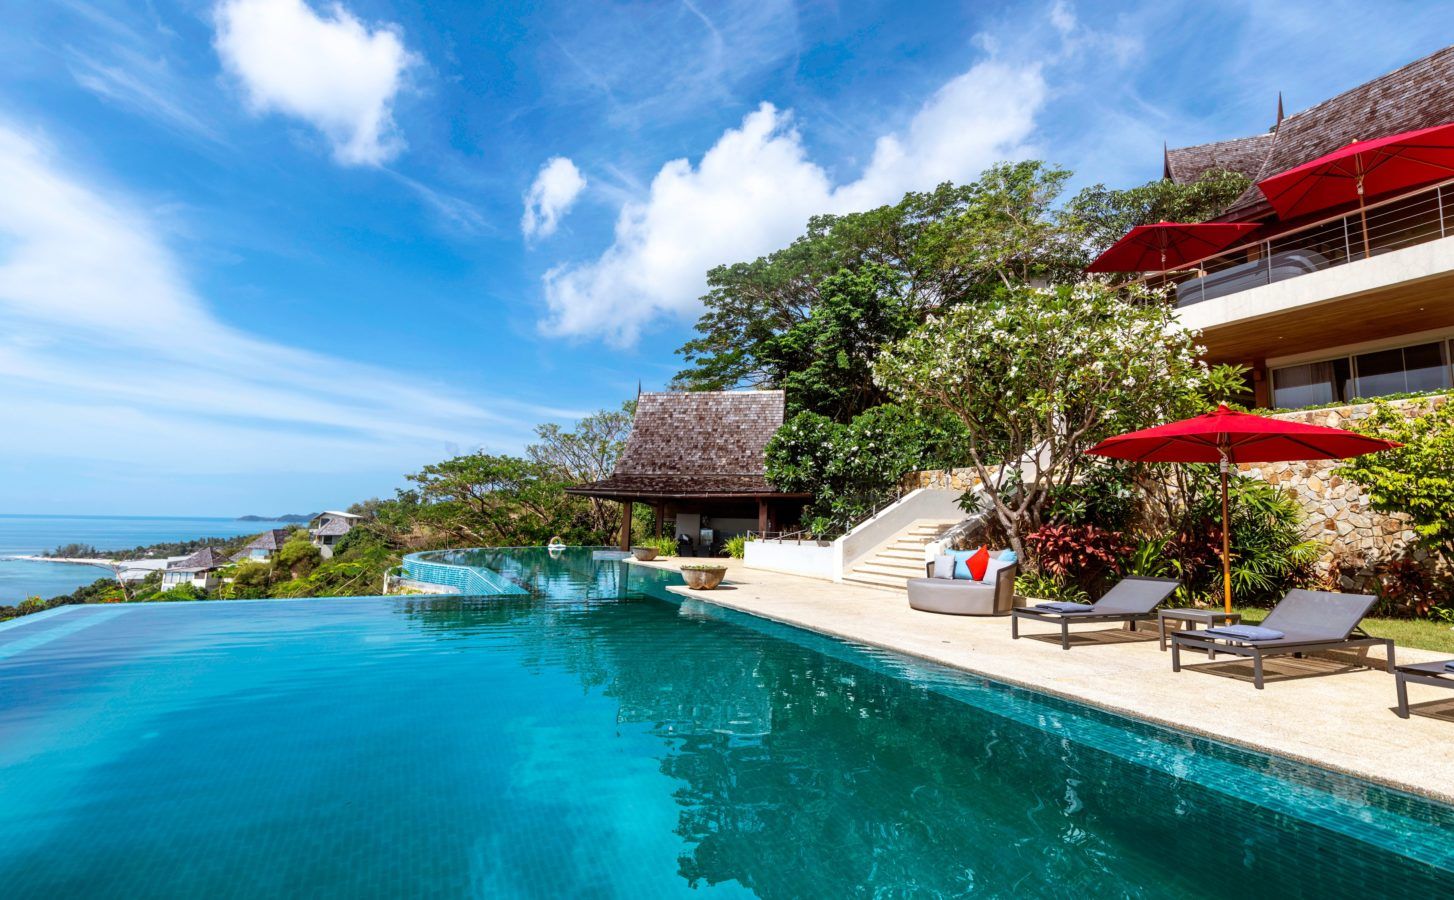 LSA Curates: Plan ahead a trip to Baan Jakawan in Koh Samui with these exclusive deals